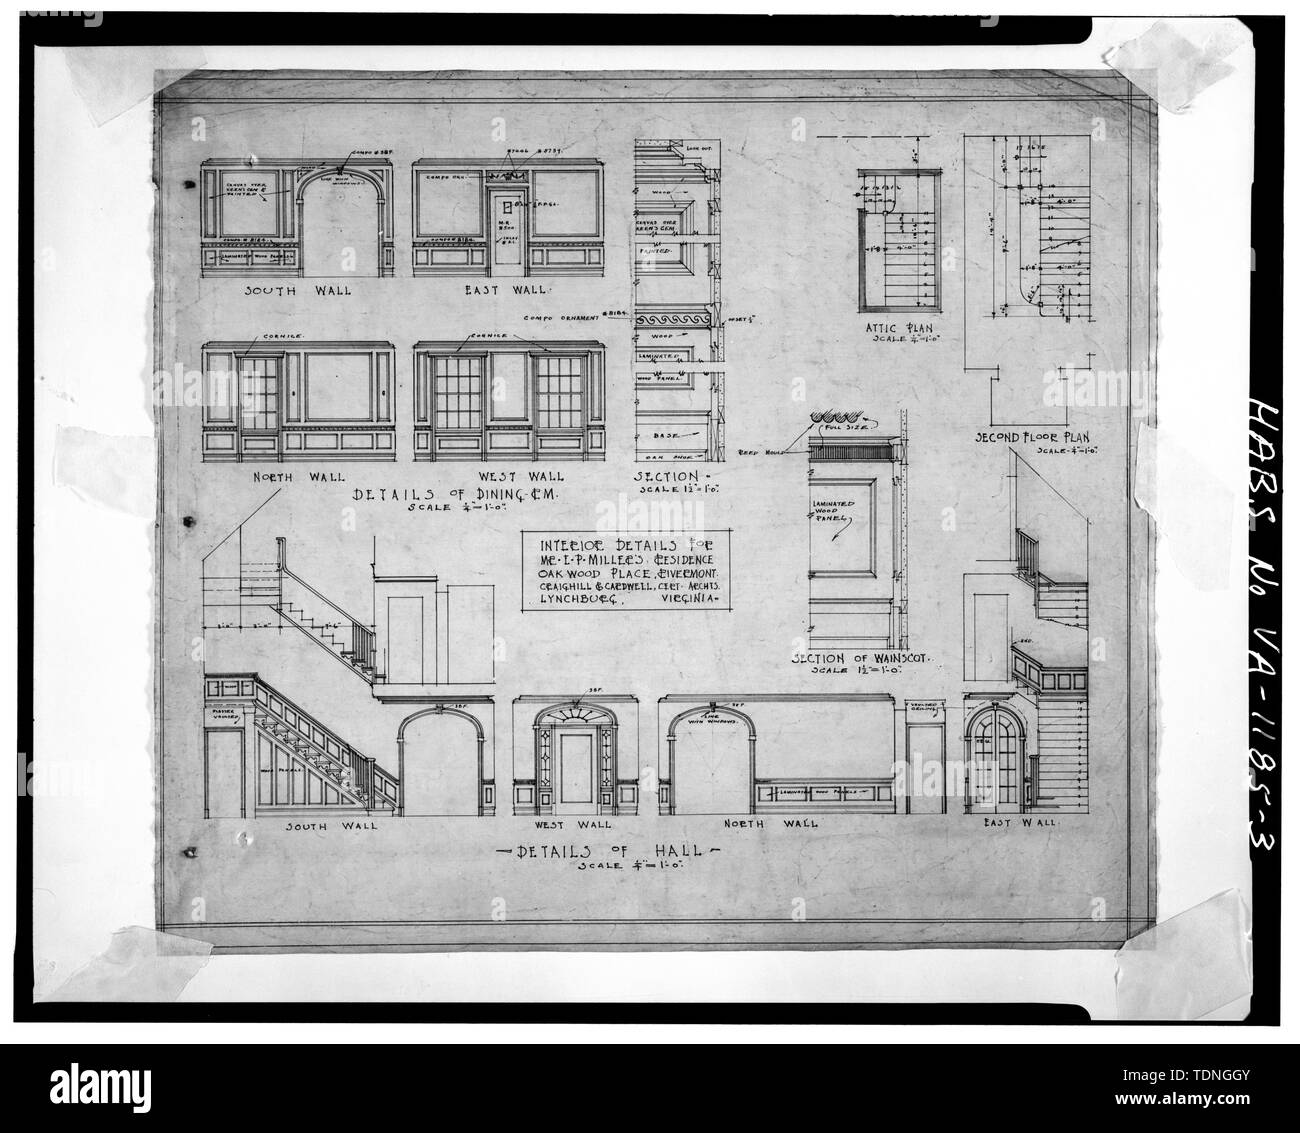 Photocopy Of Original Drawing In Lynchburg Architectural